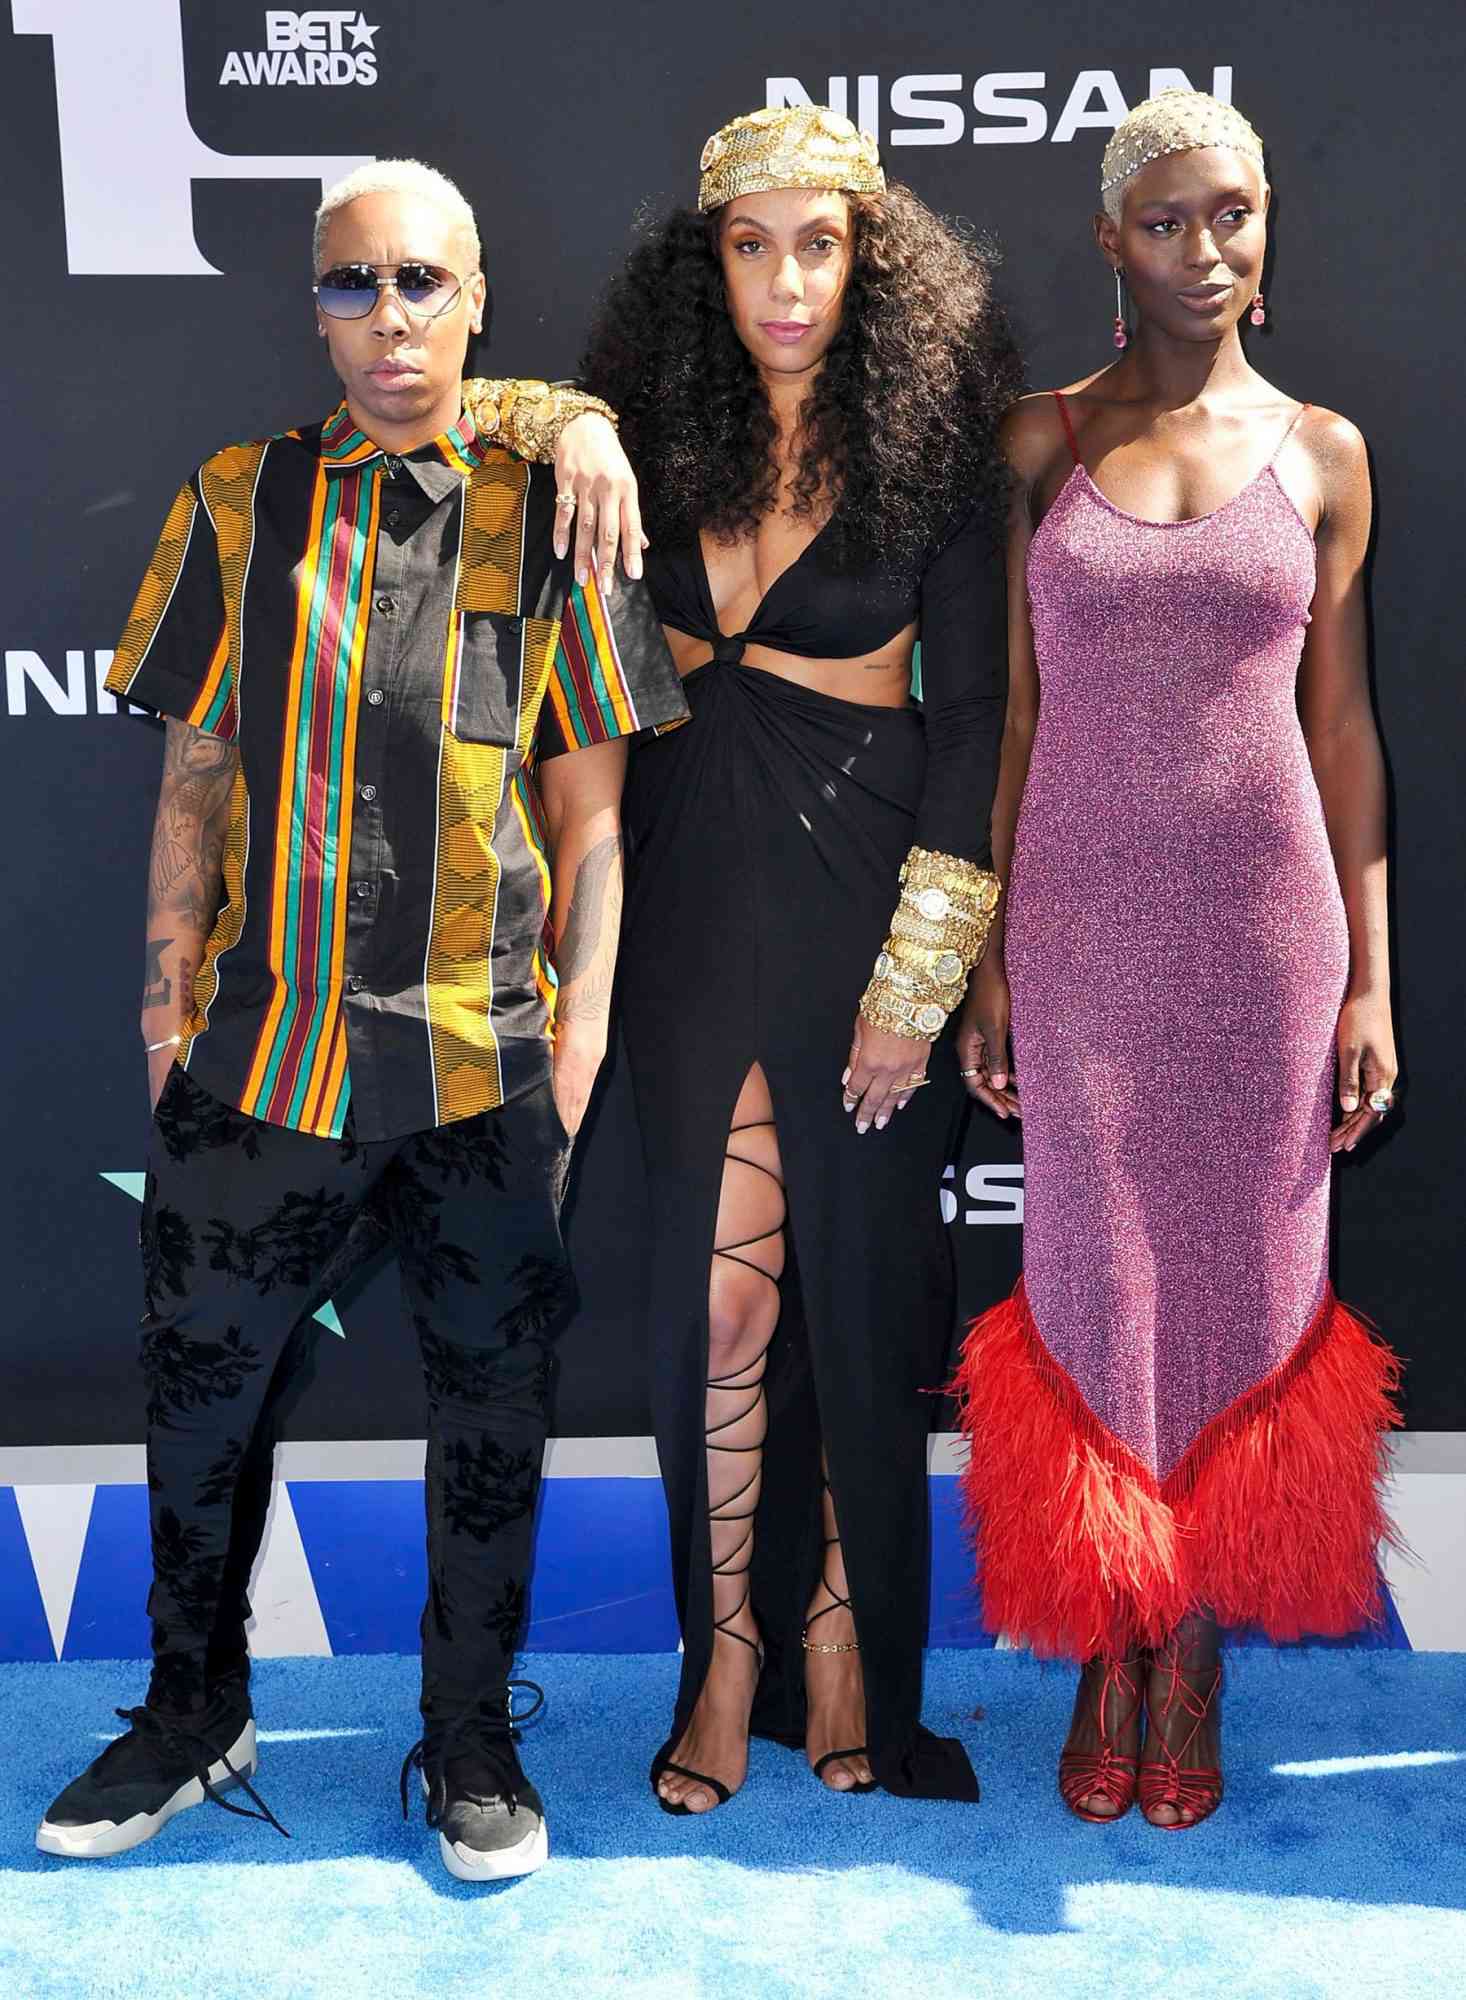 Mandatory Credit: Photo by Richard Shotwell/Invision/AP/Shutterstock (10319946bm) Lena Waithe, Melina Matsoukas, Jodie Turner-Smith. Lena Waithe, from left, Melina Matsoukas and Jodie Turner-Smith arrive at the BET Awards, at the Microsoft Theater in Los Angeles 2019 BET Awards - Arrivals, Los Angeles, USA - 23 Jun 2019